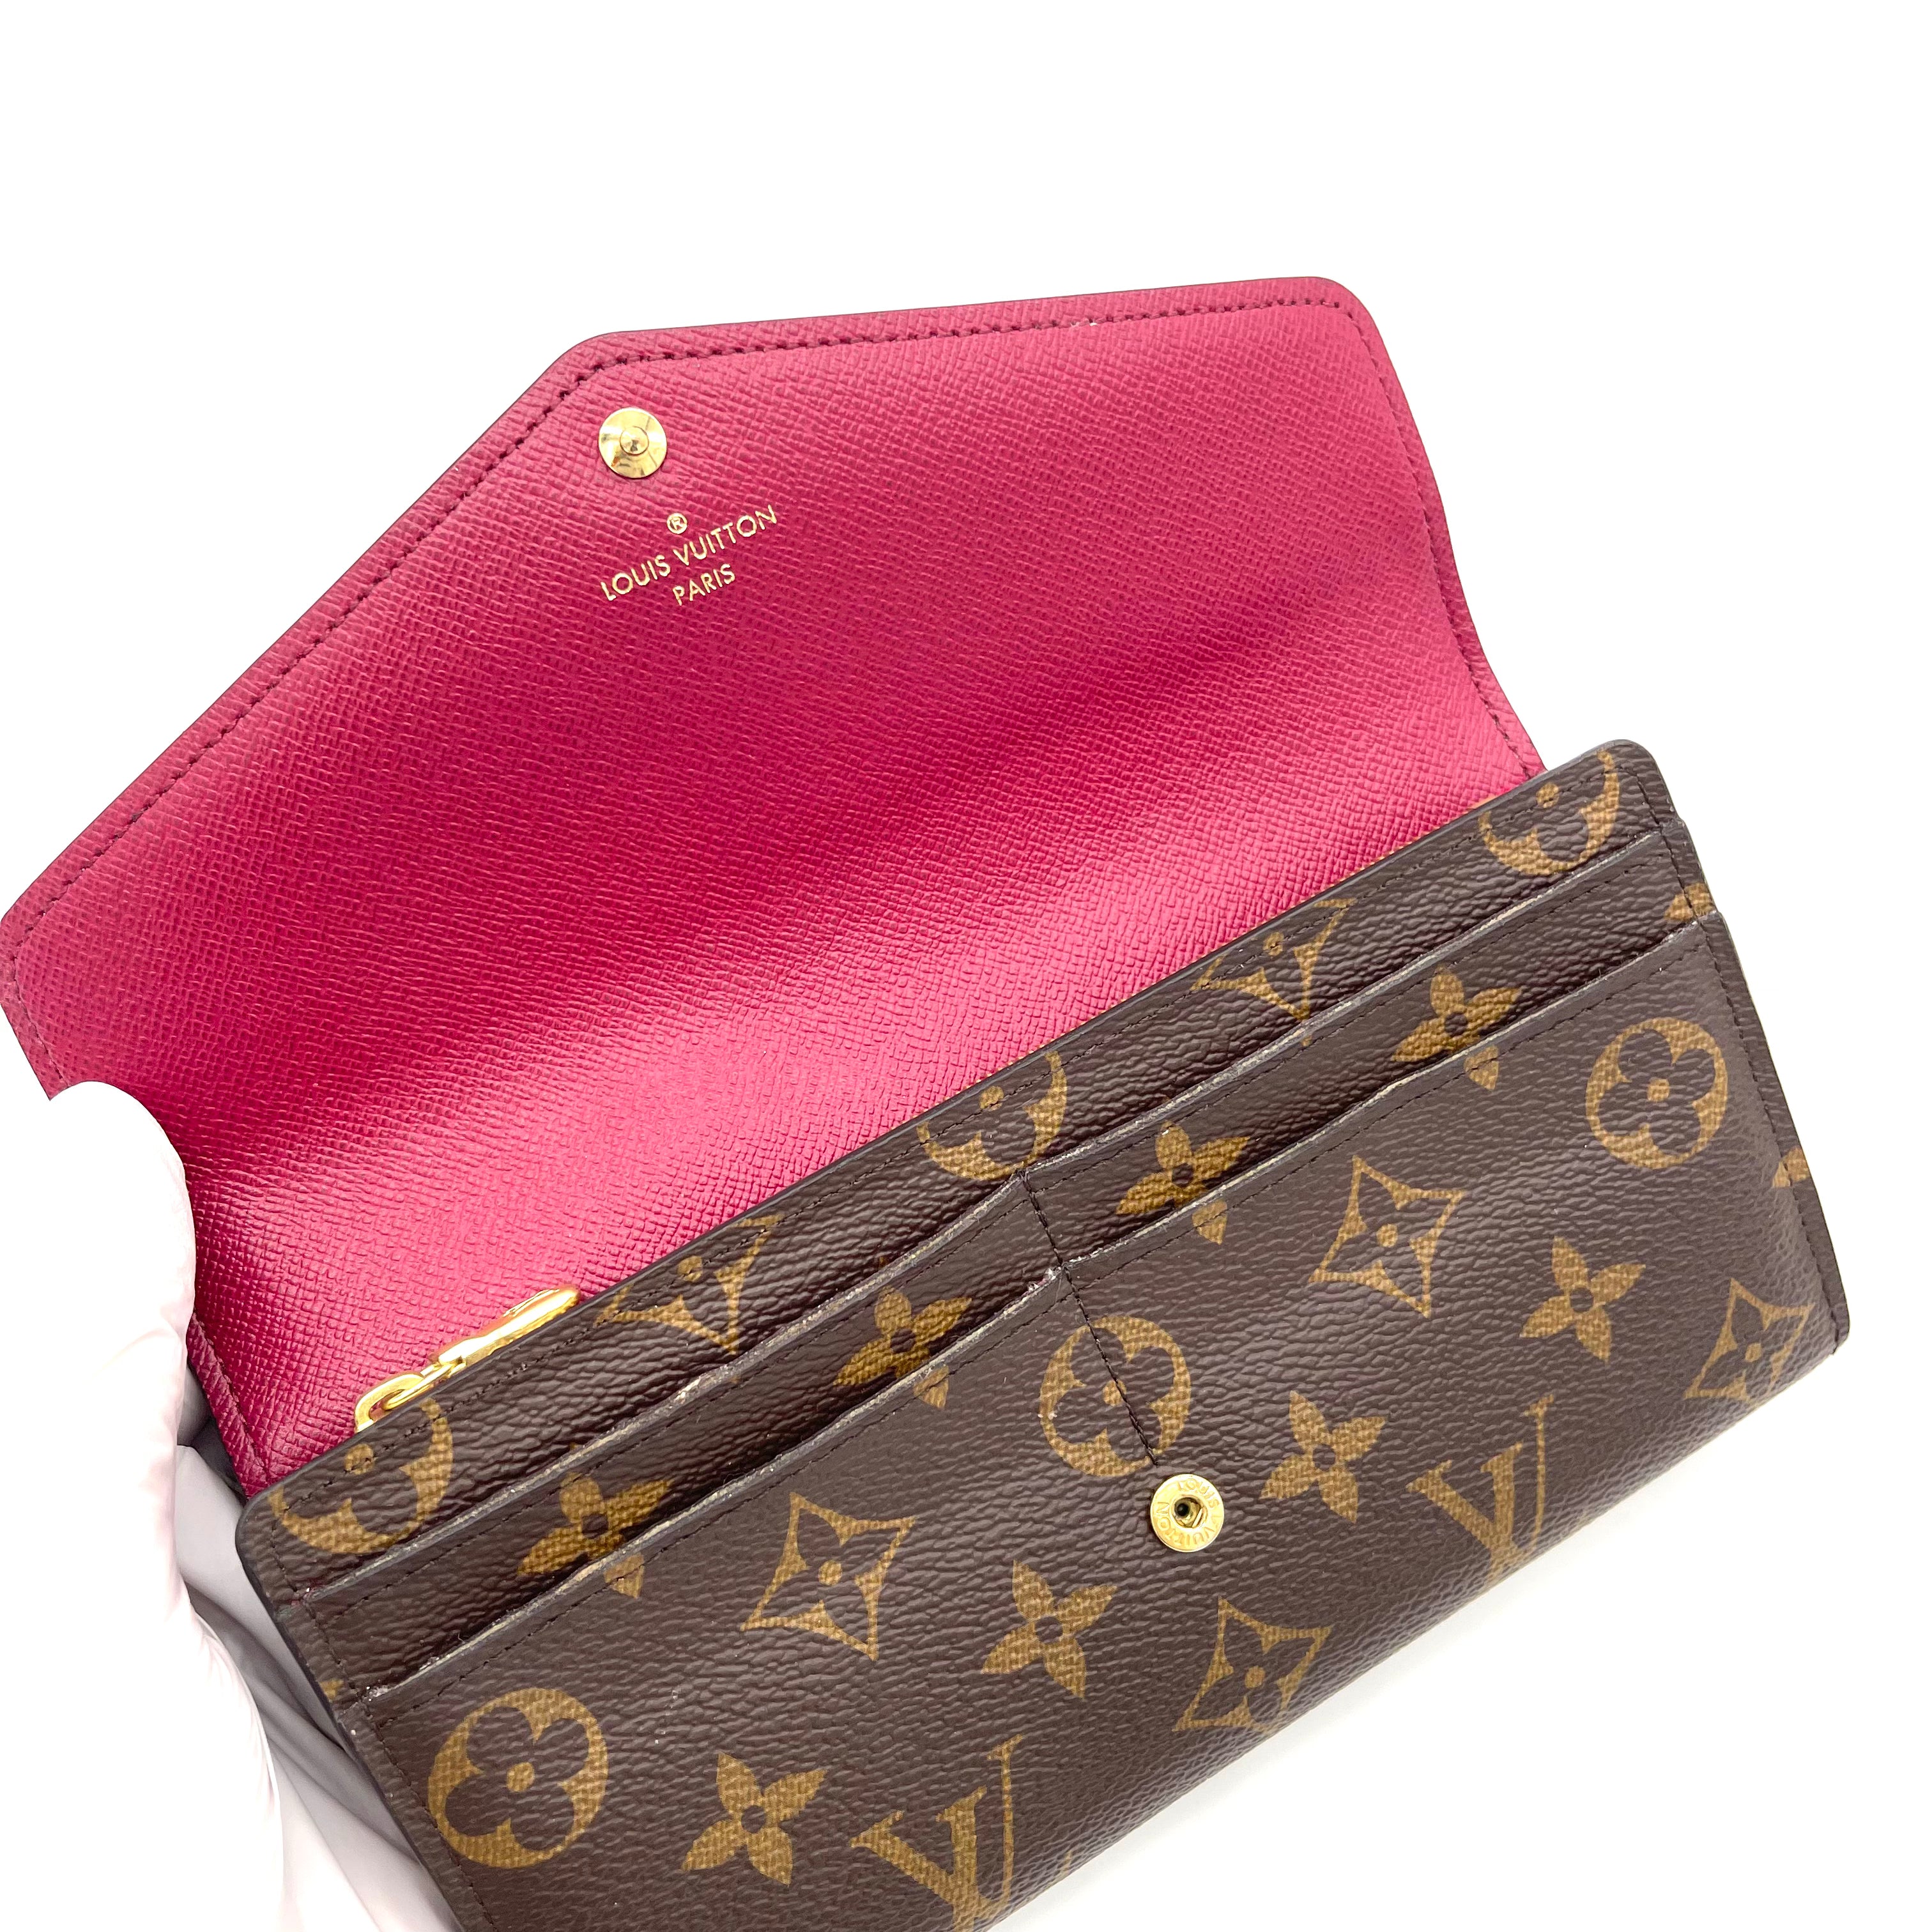 Louis Vuitton Sarah Wallet in Monogram and Fuchsia. LOVE how neat and  organized this wallet is! There are 16 credit card slo…